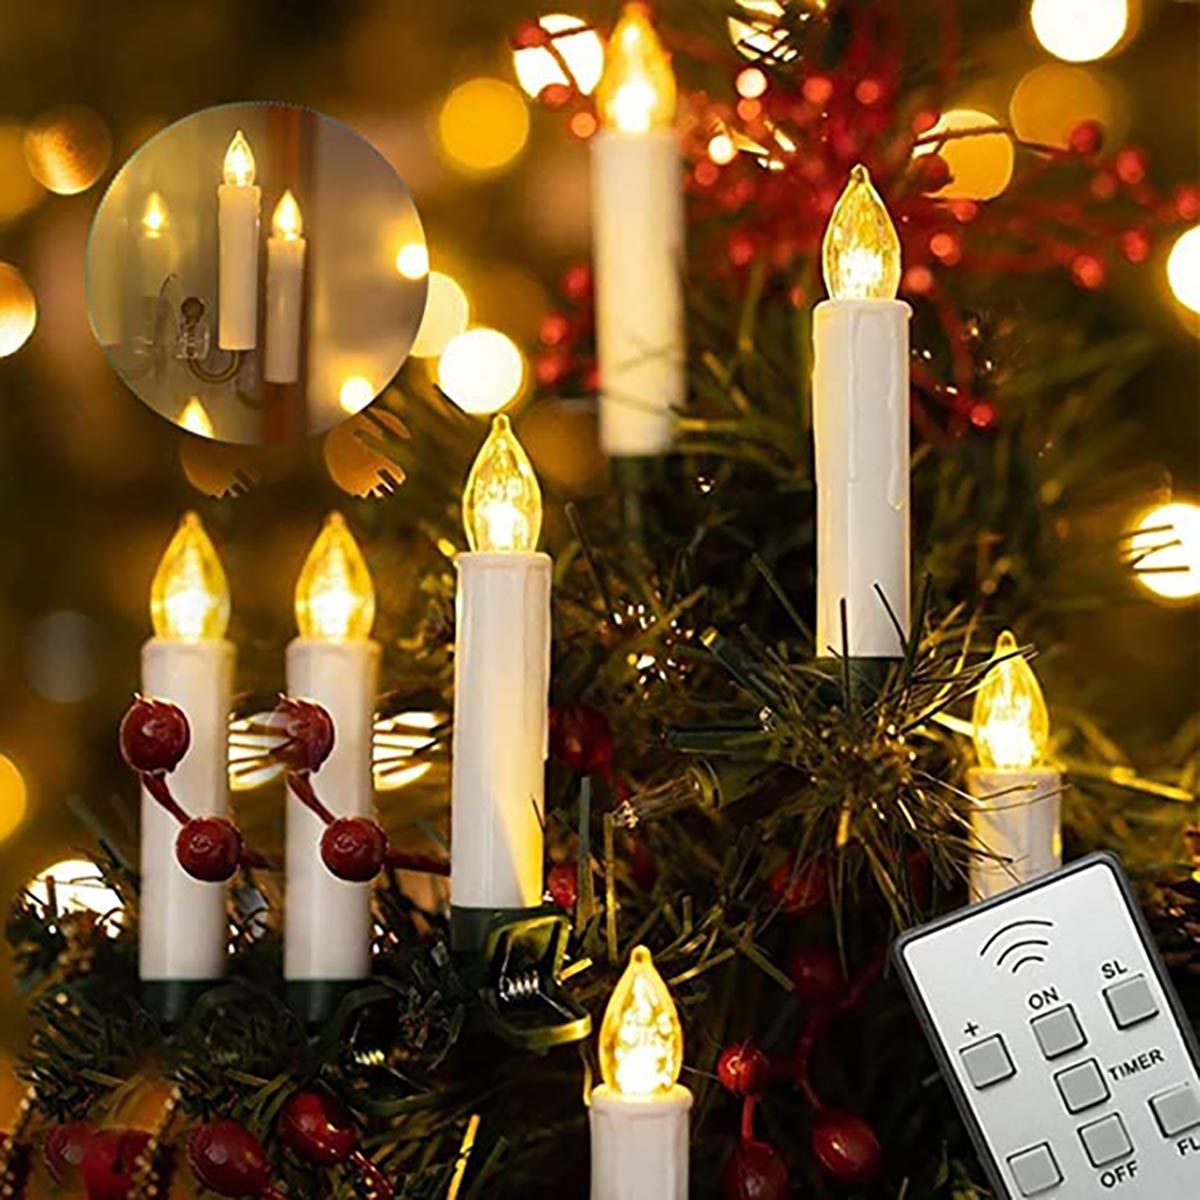 Christmas Tree Remote, Control Your Christmas Lights with the Touch of a  Button